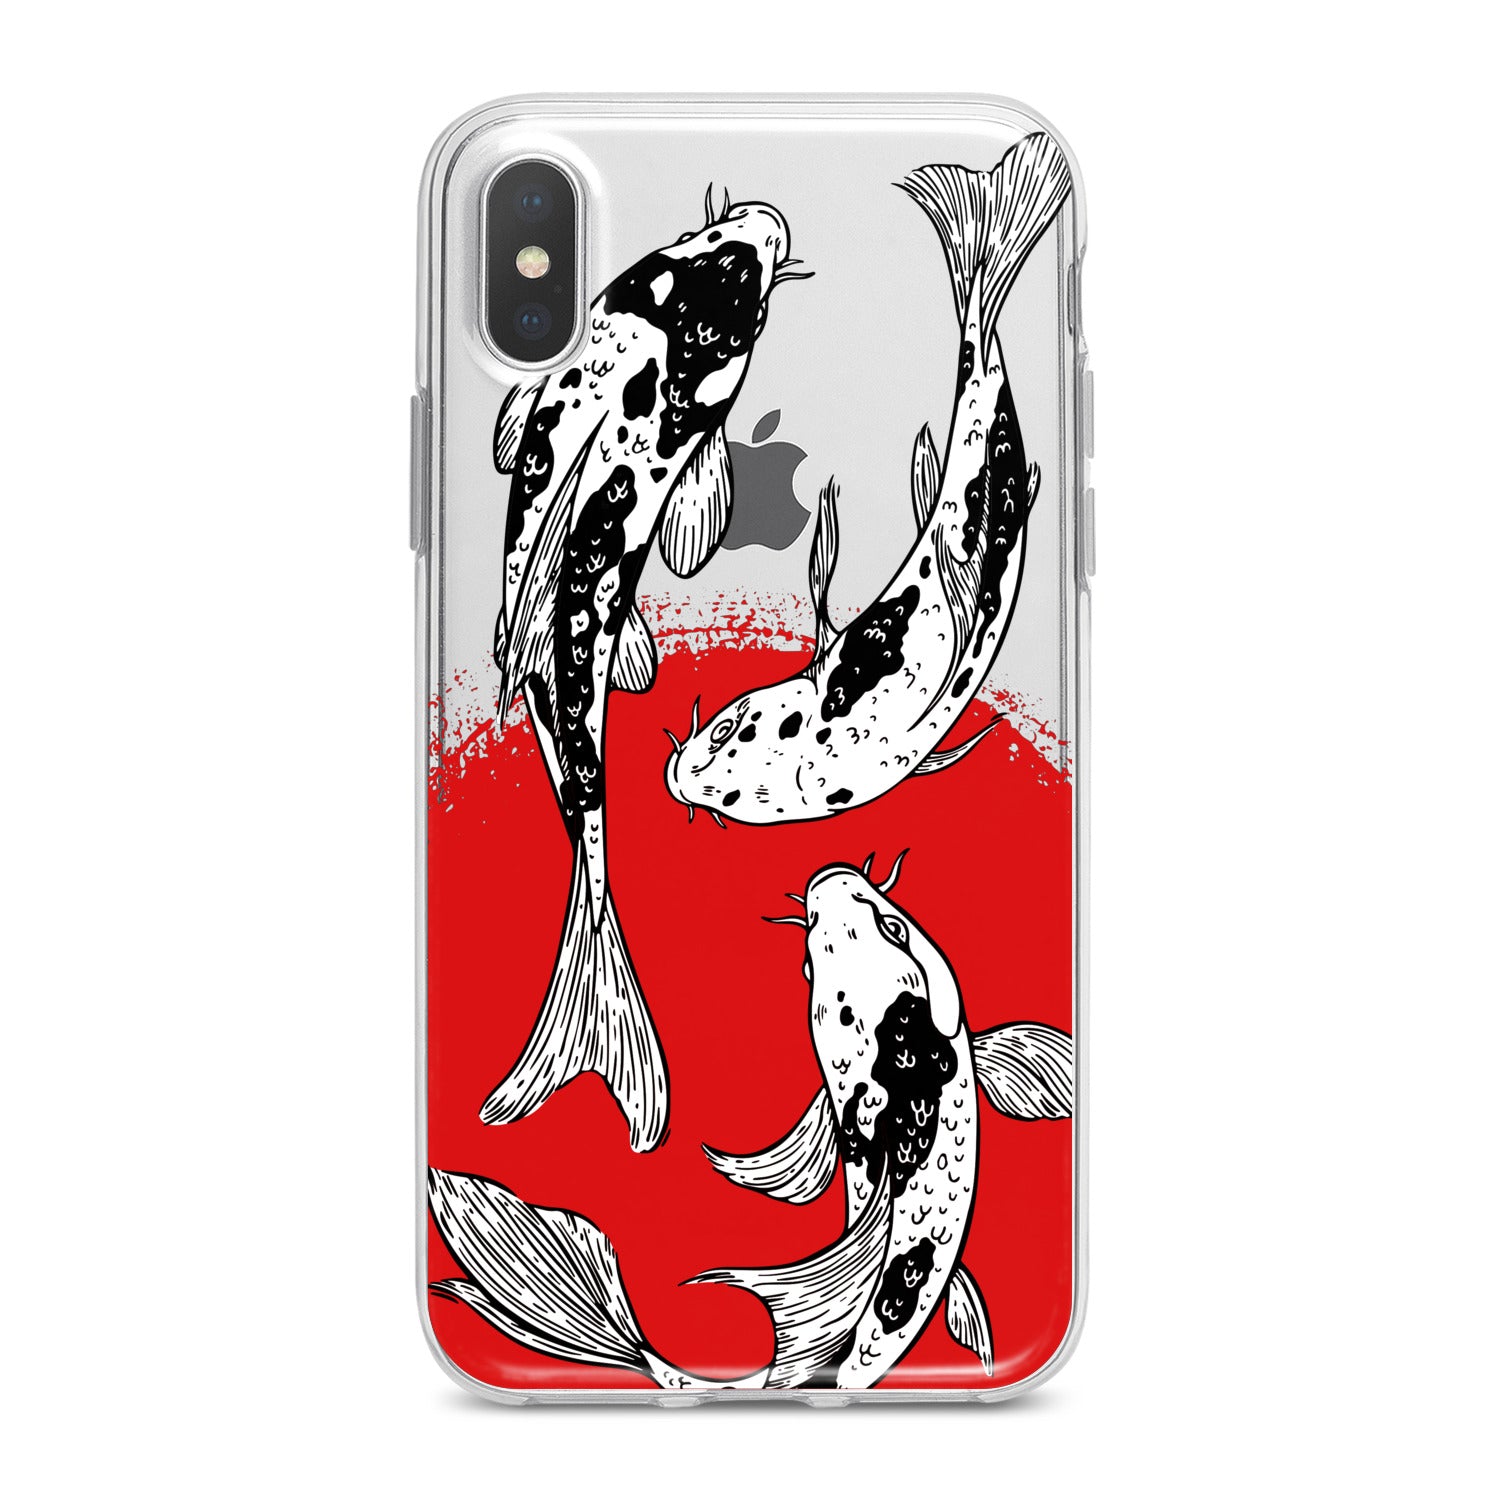 Lex Altern Koi Fishes Painting Phone Case for your iPhone & Android phone.